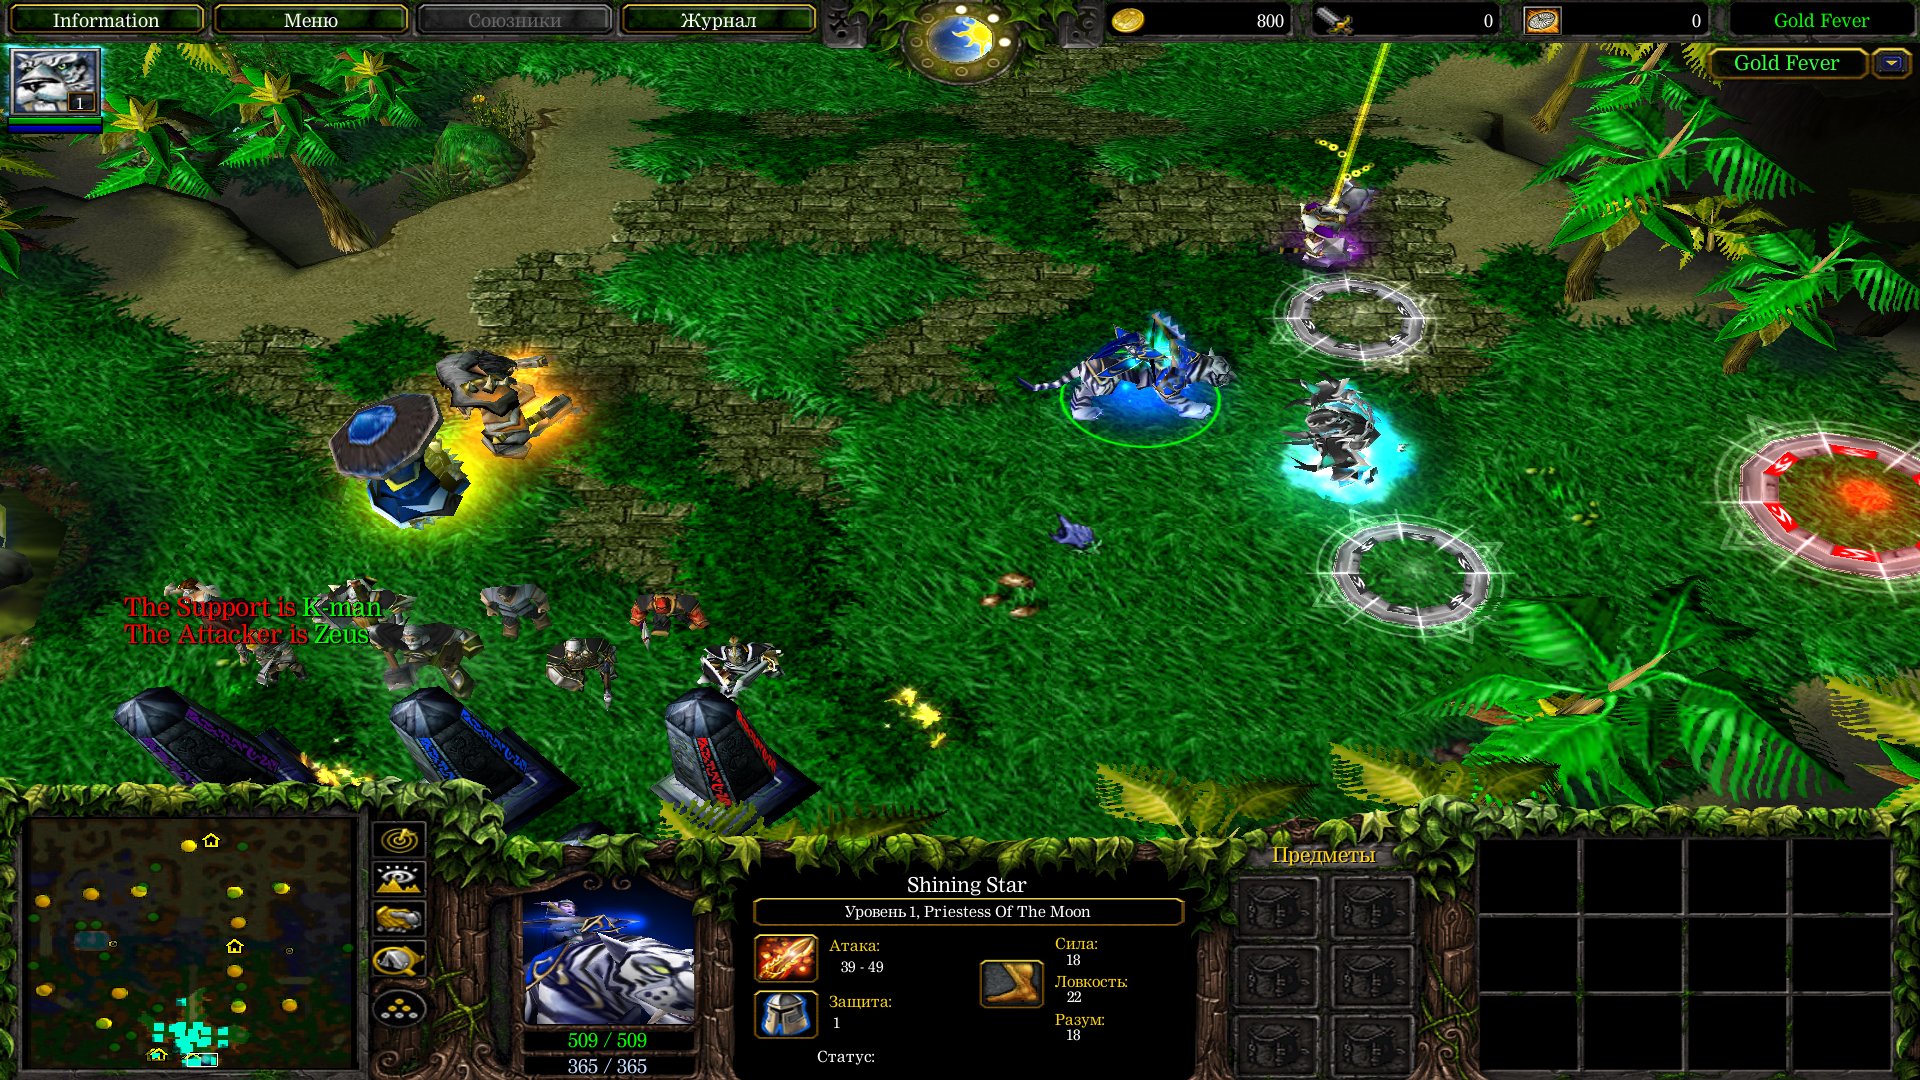 Warcraft 3 all star league. Dota wc3. Wc3. Warcraft III Reign of Chaos. Happy wc3.